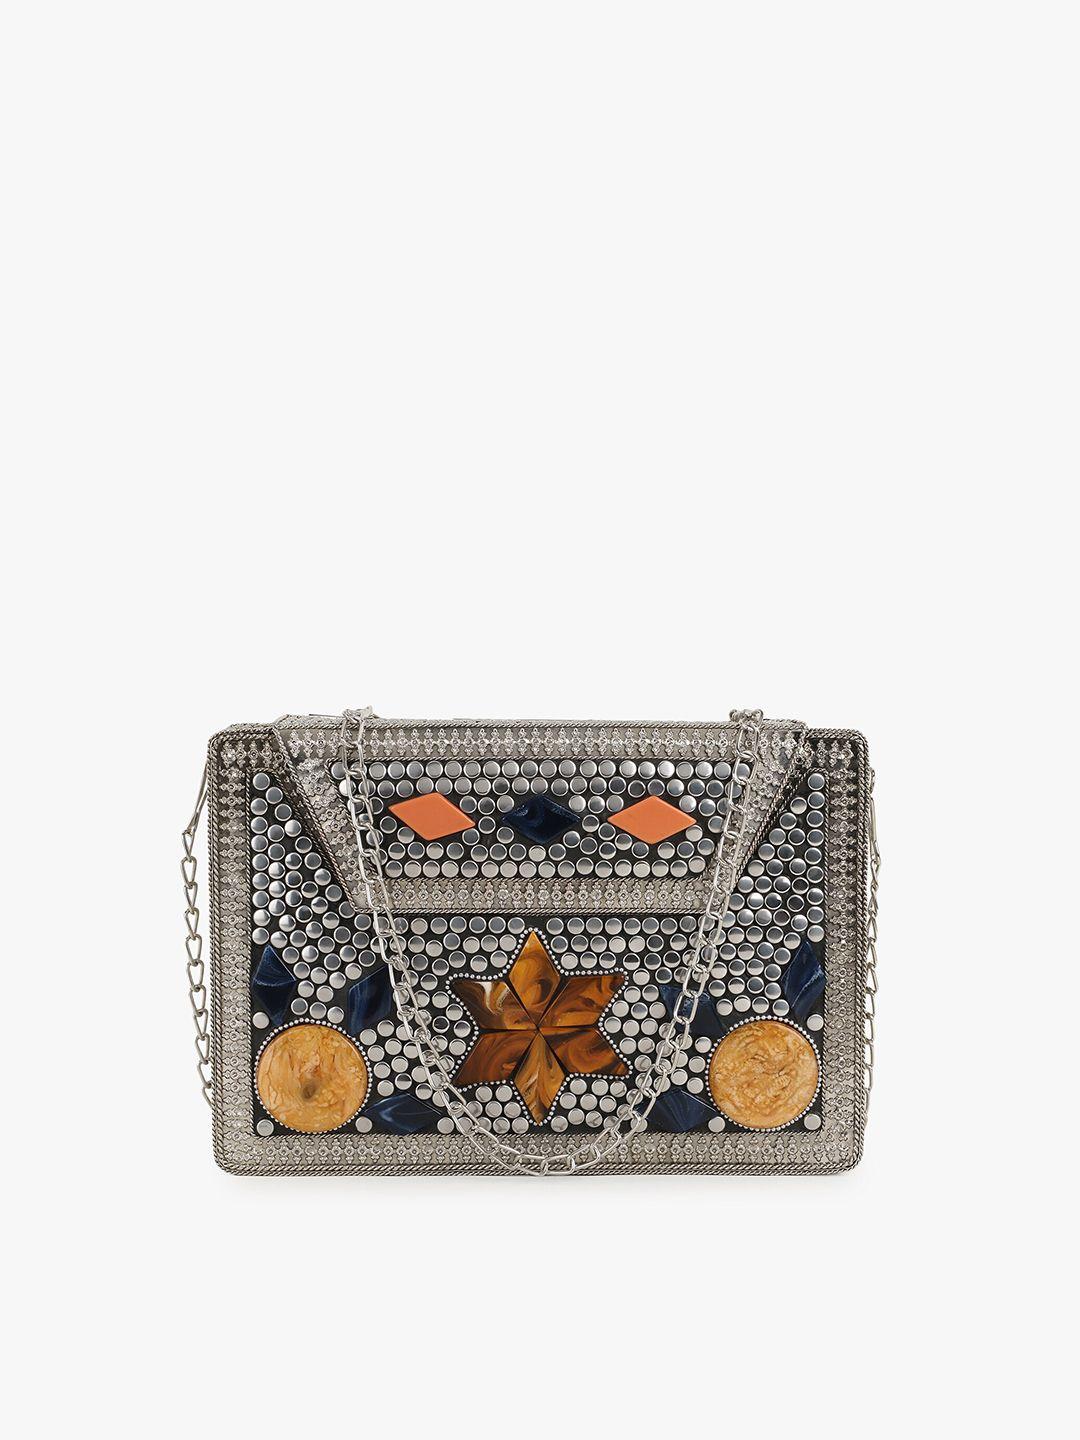 anekaant silver-toned embellished envelope clutch